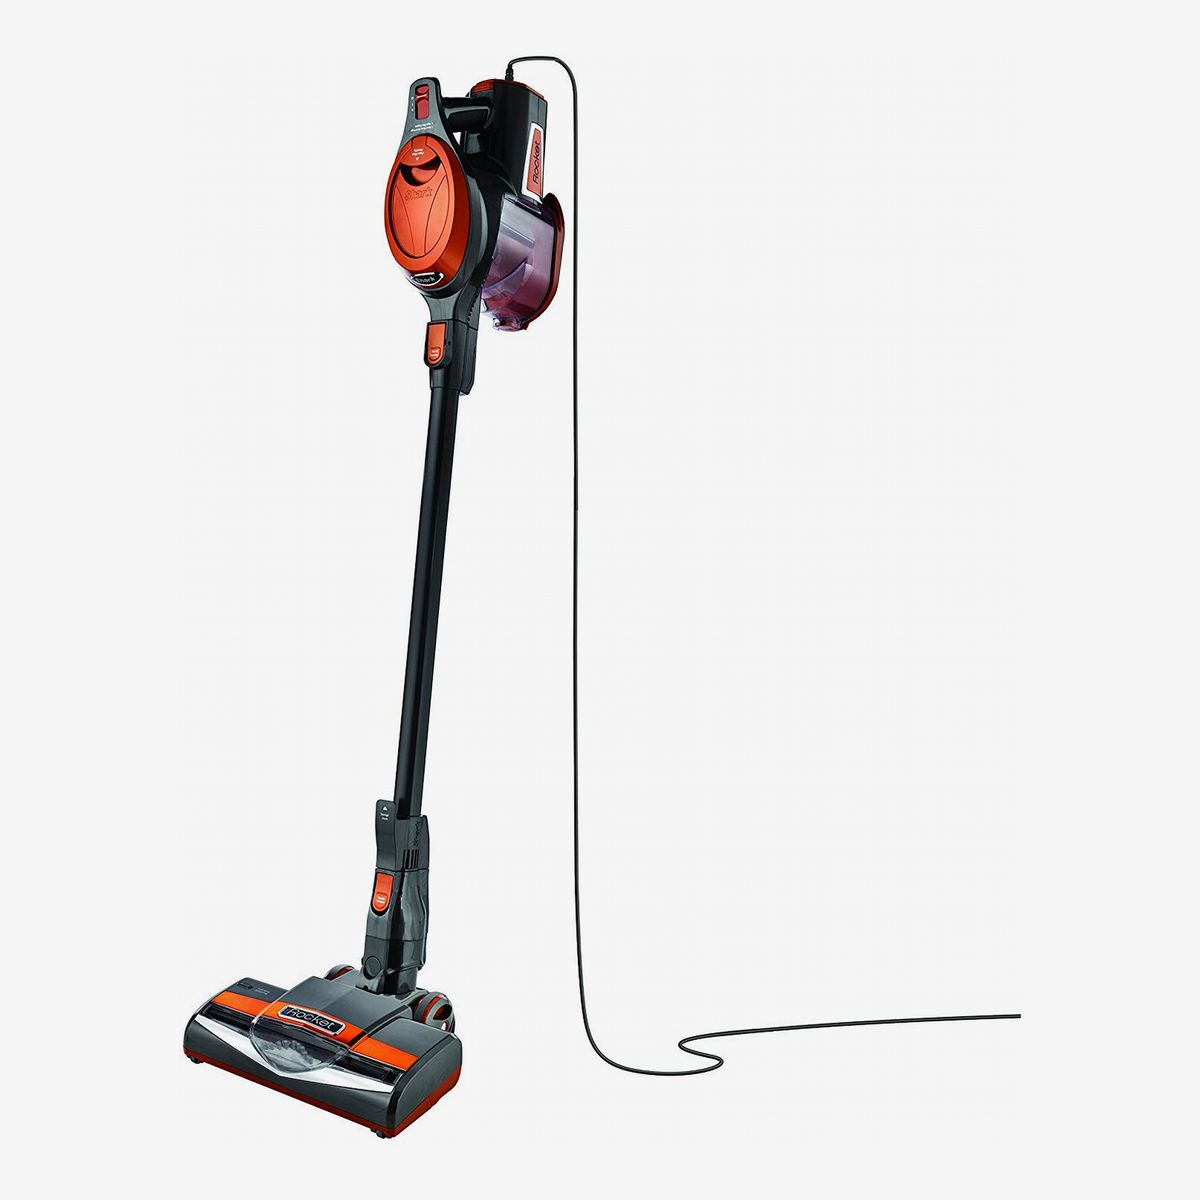 18 Best Vacuums For Pet Hair 2021 The, Vacuums For Hardwood Floors And Pet Hair